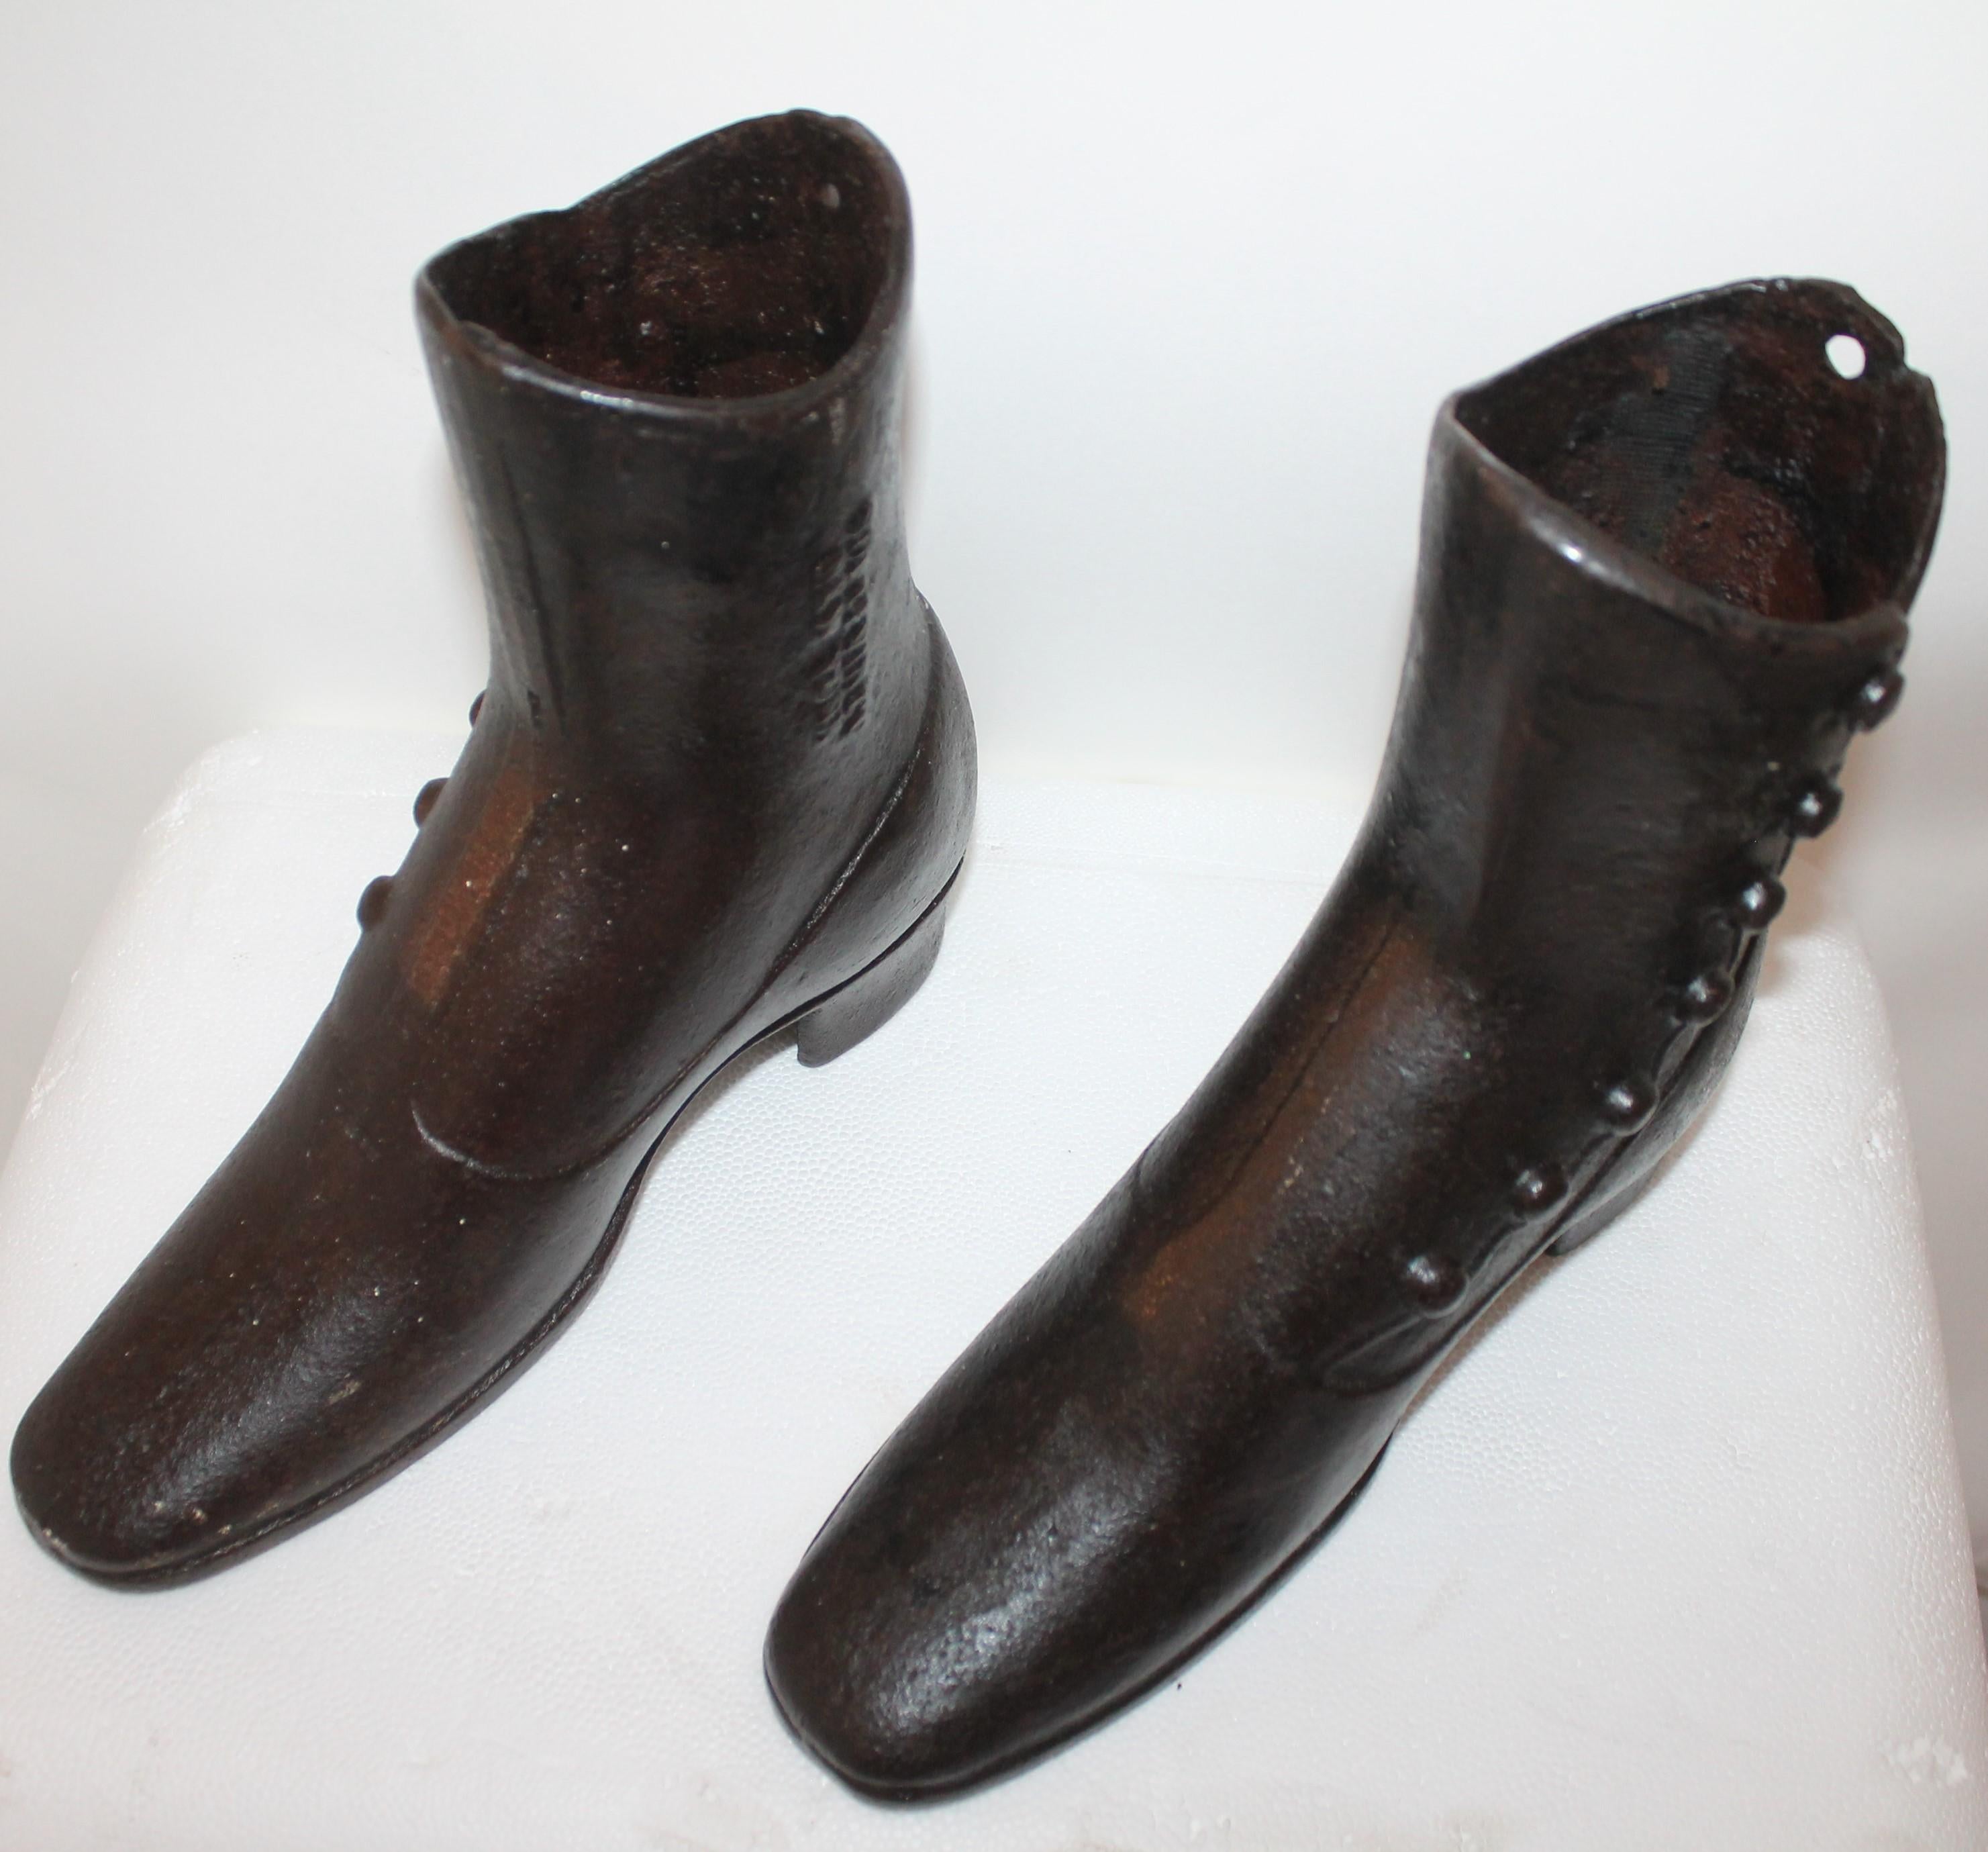 These 19th century cast iron boots are in good condition and are signed SOL LEVIN CO. NEW YORK on both boots embossed on the side of the boots. Thesee boots could also be used as door stops !